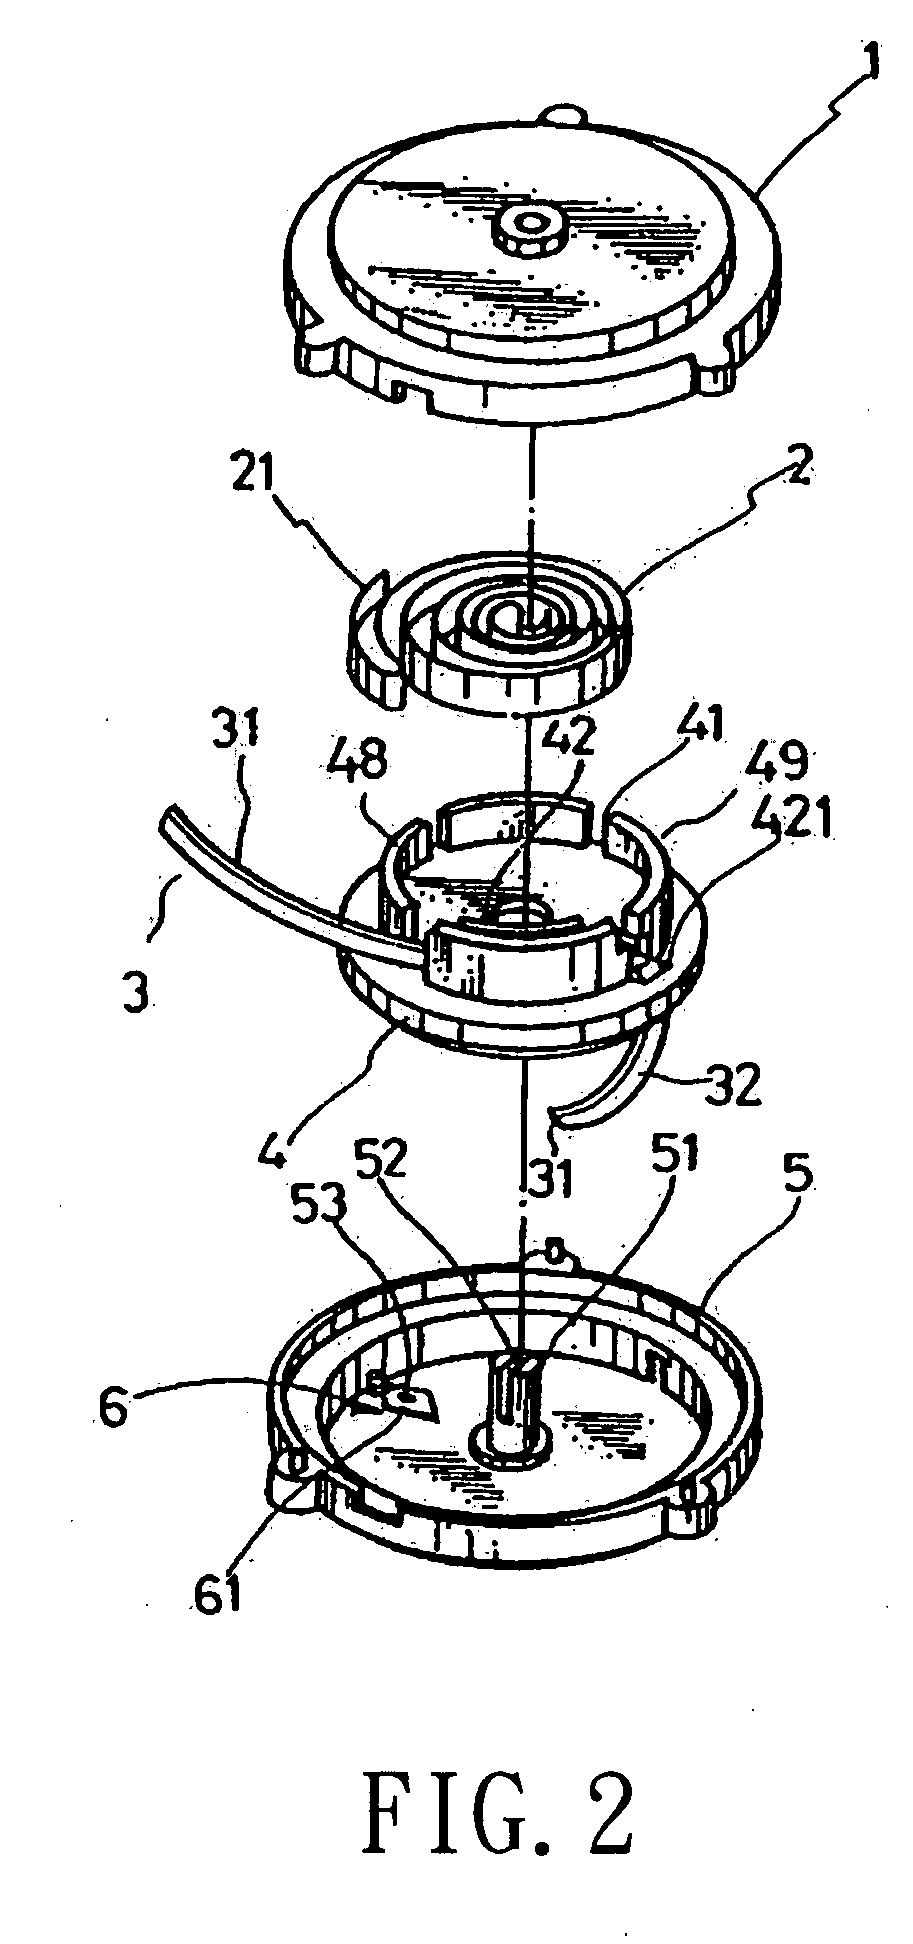 Structure of a single-pull reel